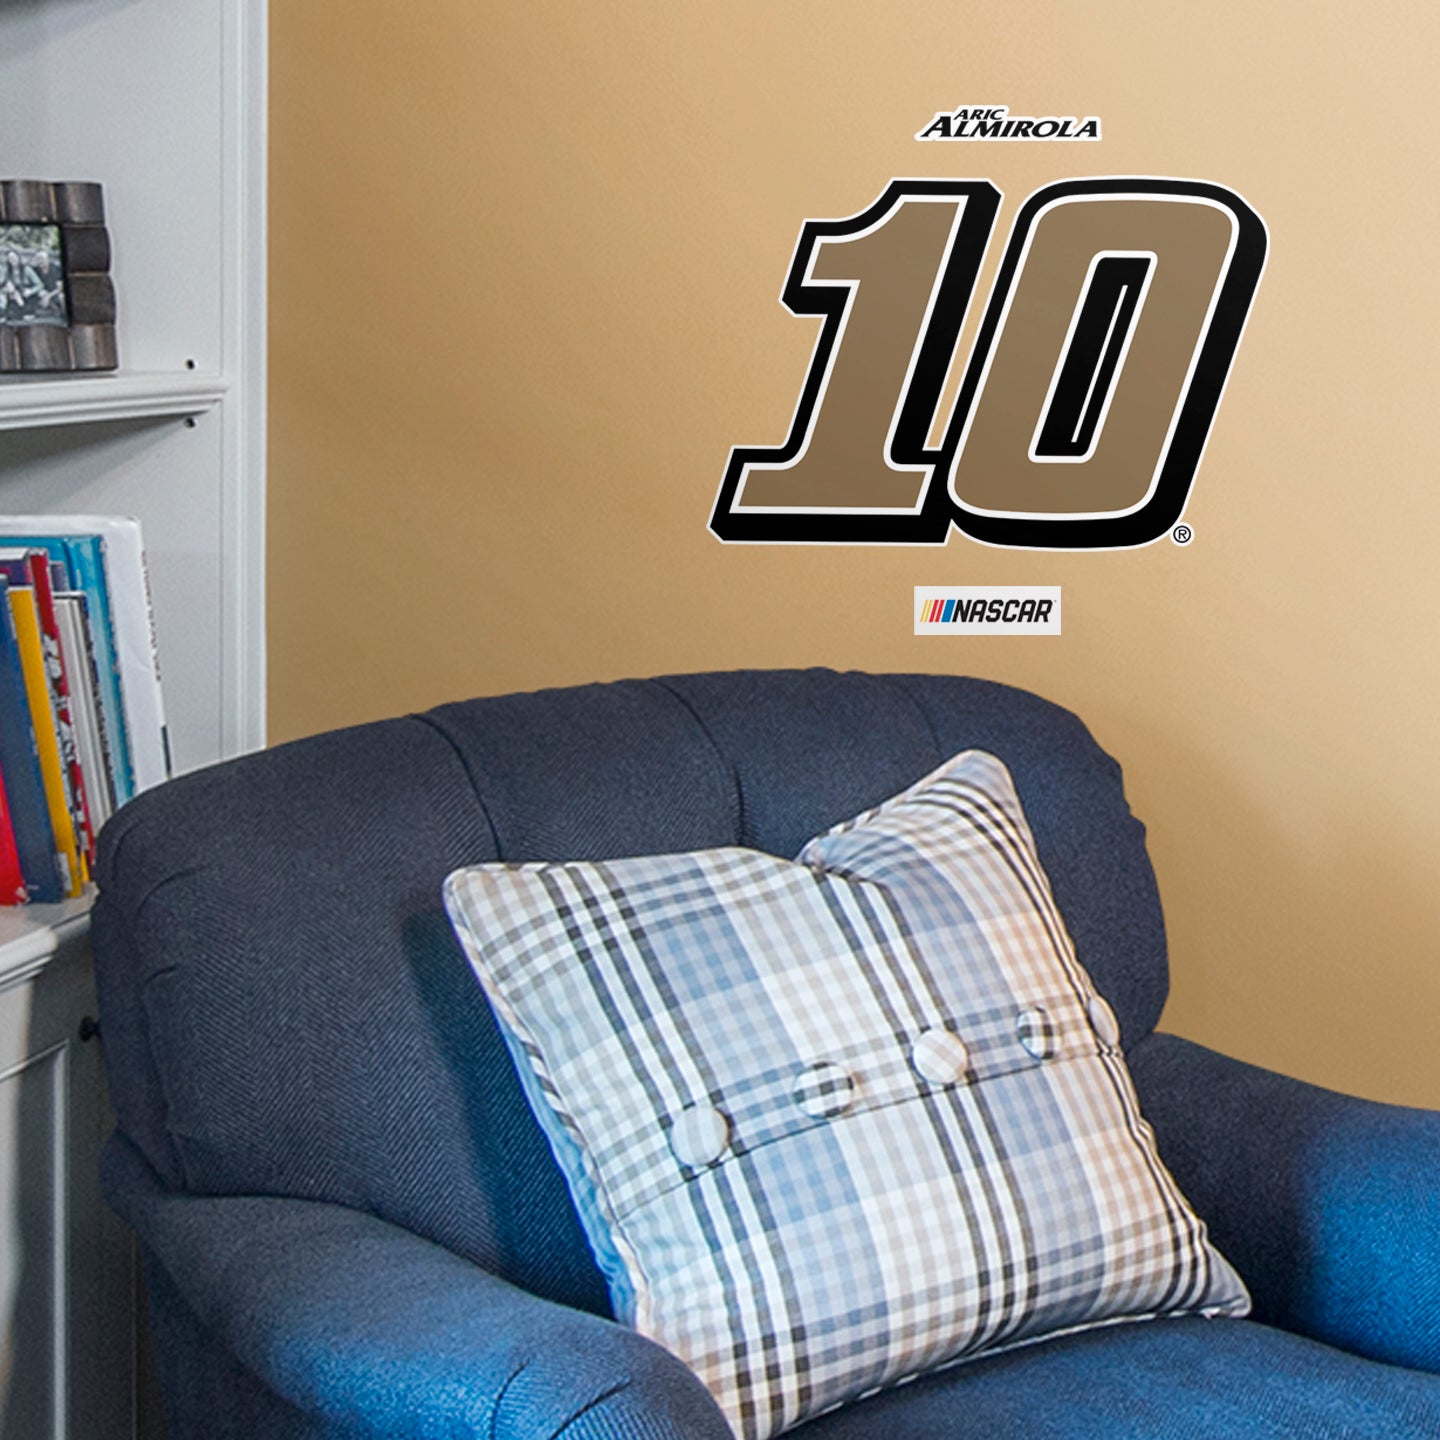 Aric Almirola 2021 #10 Logo - Officially Licensed NASCAR Removable Wall Decal Large by Fathead | Vinyl